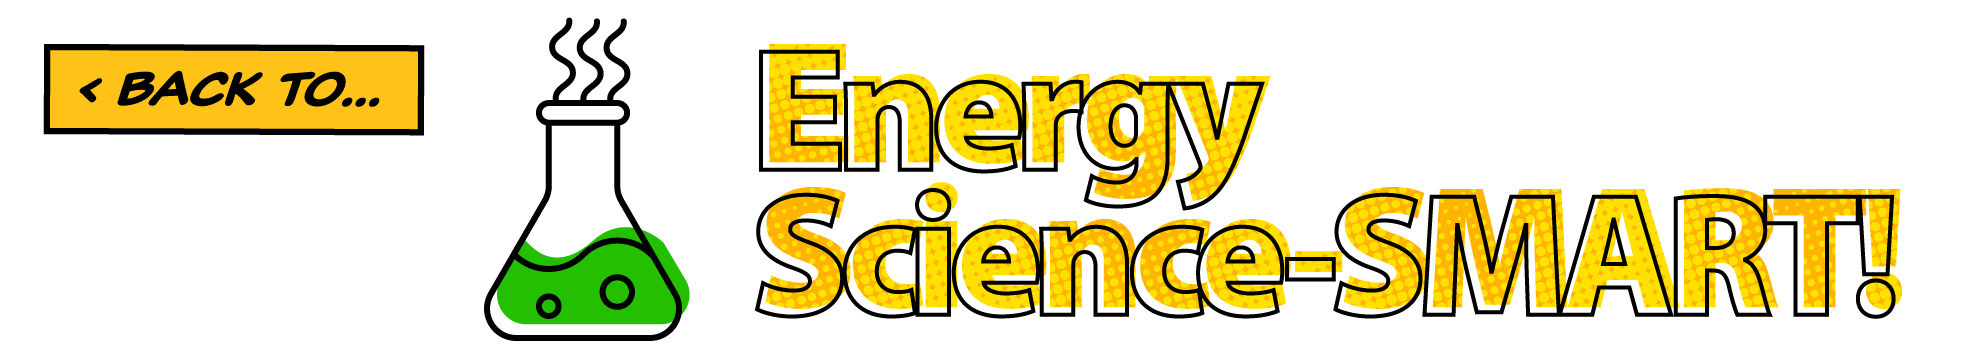 Back to… Energy Science-SMART!